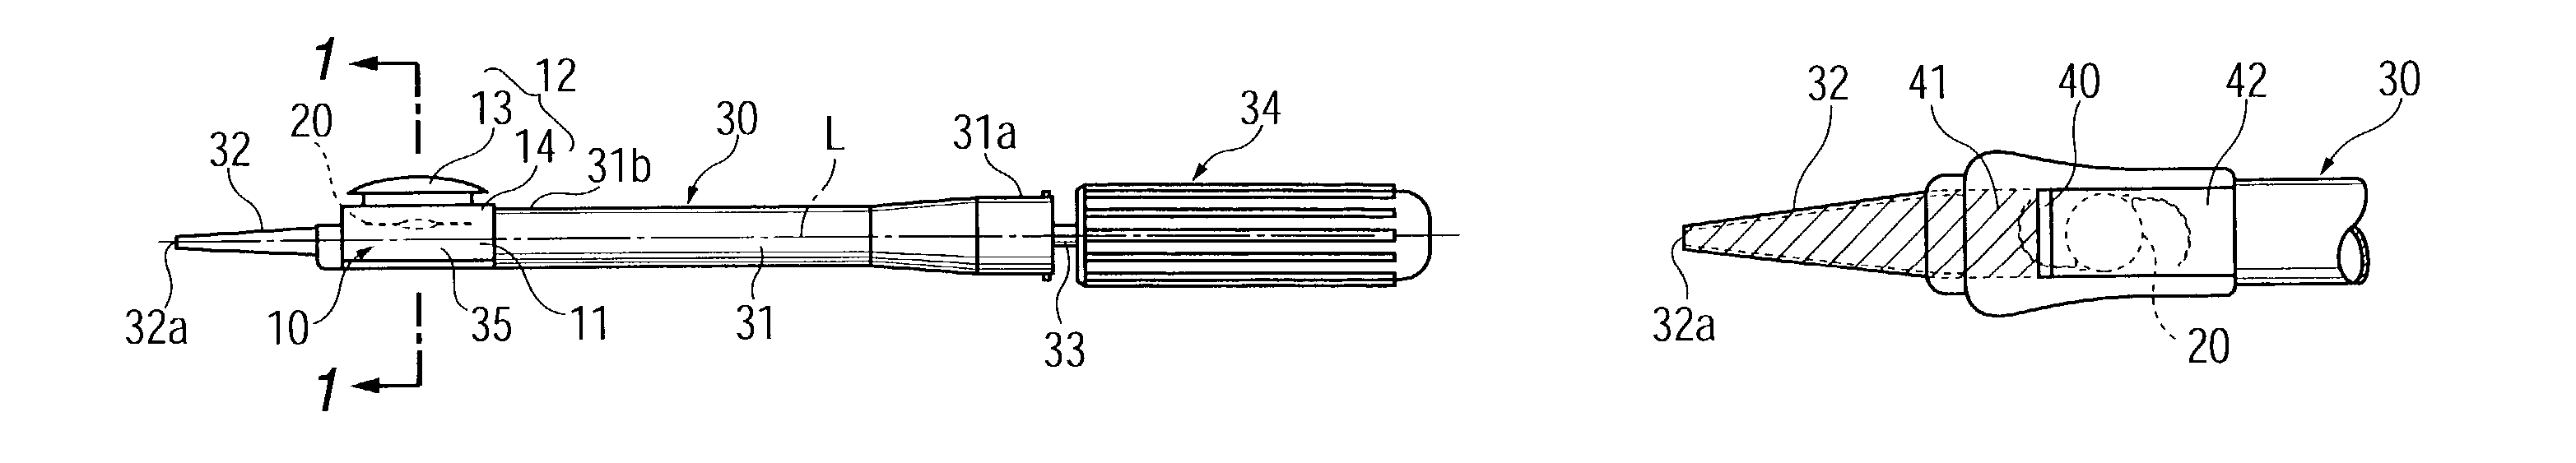 Insertion device for intraocular lens